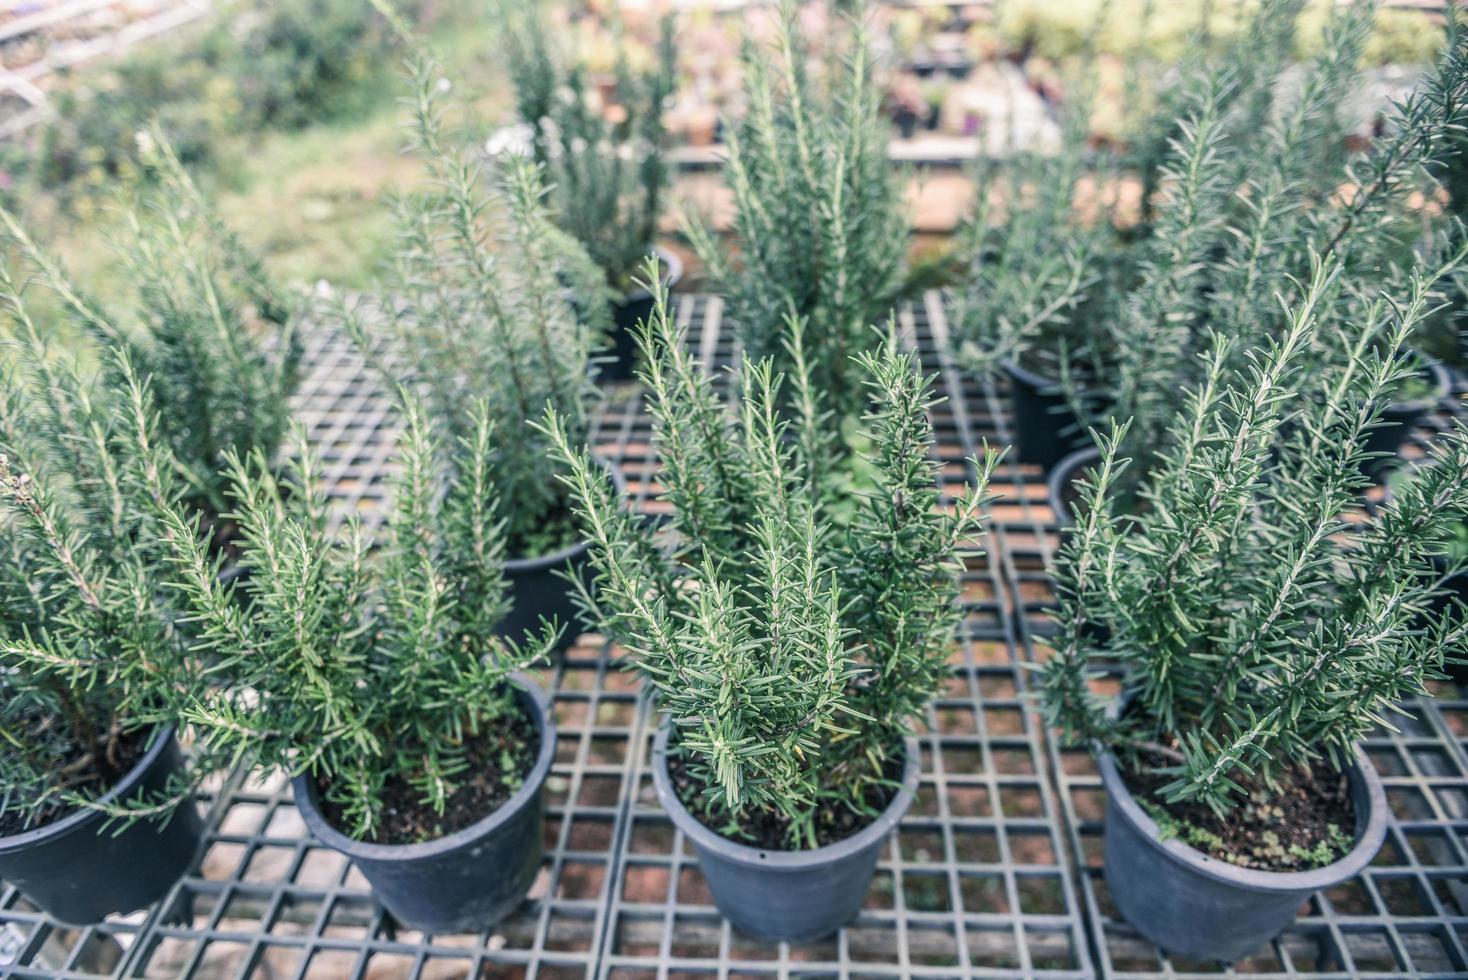 Rosemary plant growing in the garden for extracts essential oil - Fresh rosemary nature herbs in the nursery greenhouse background photo